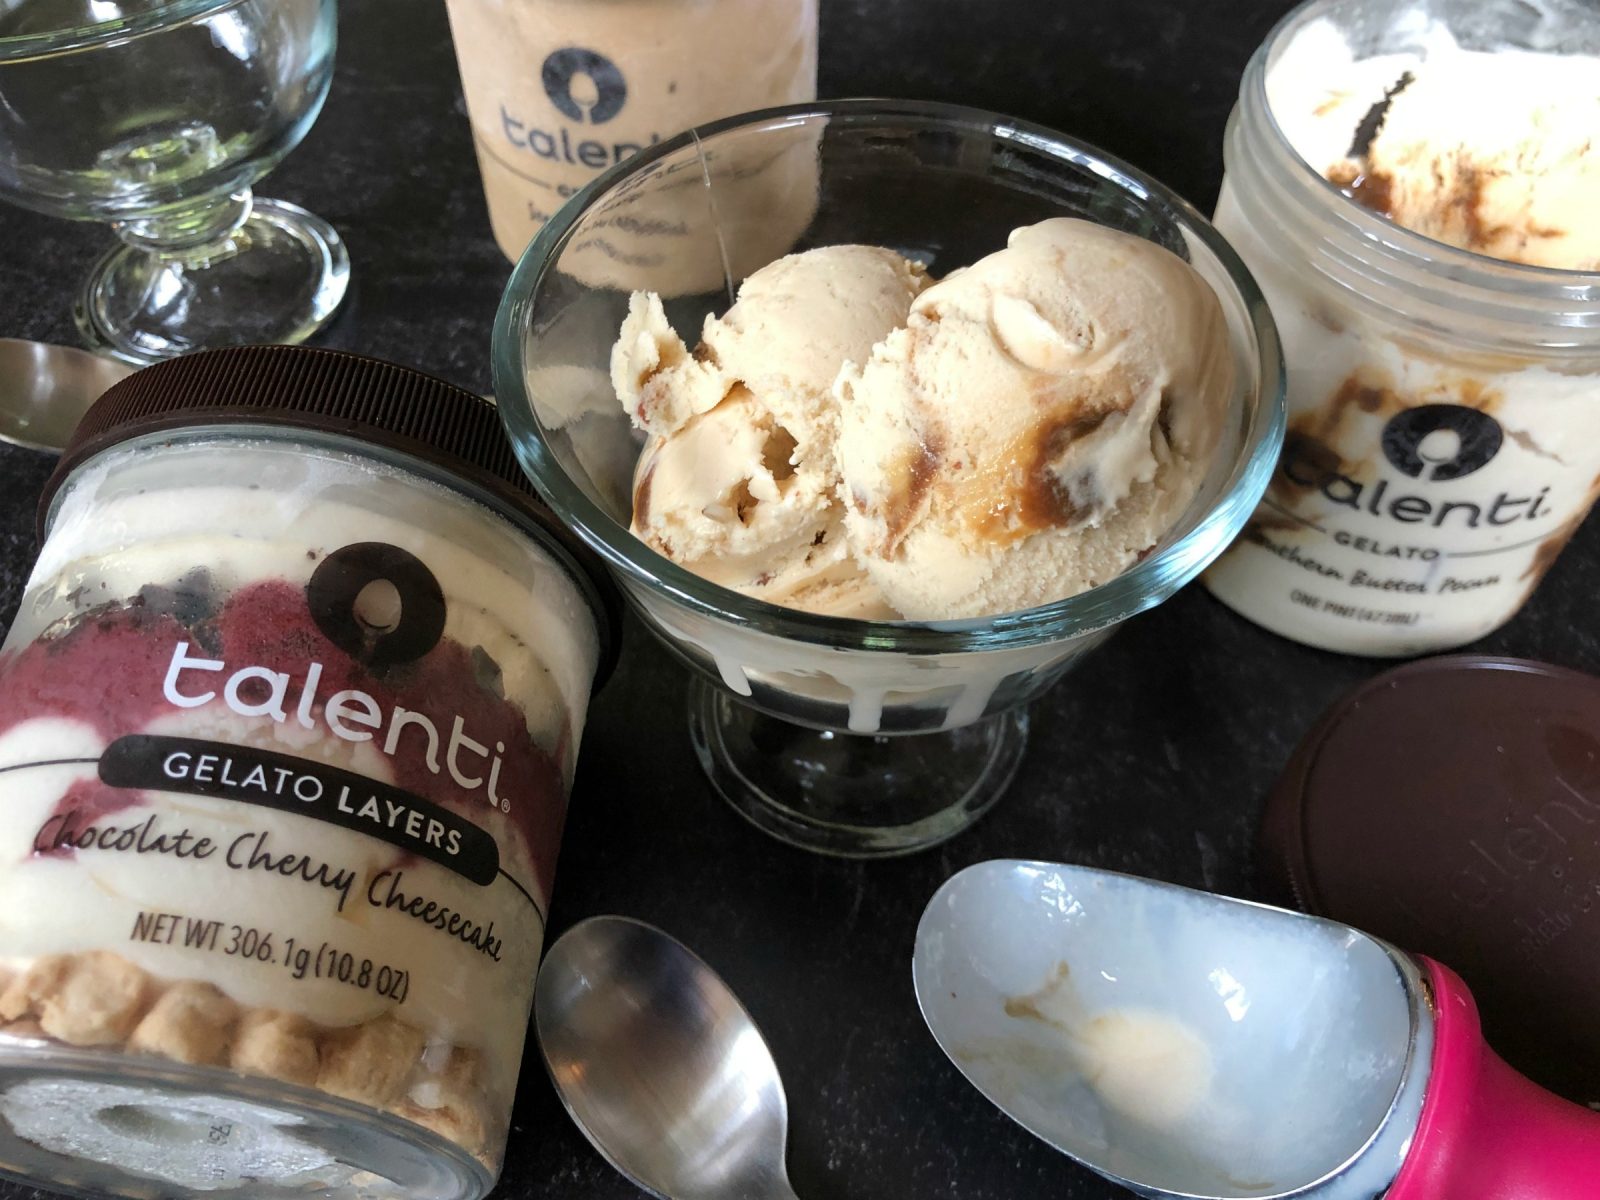 Get Savings On Talenti, Ben & Jerry’s & Magnum At Publix – Get Tasty Treats For Your Whole Family!